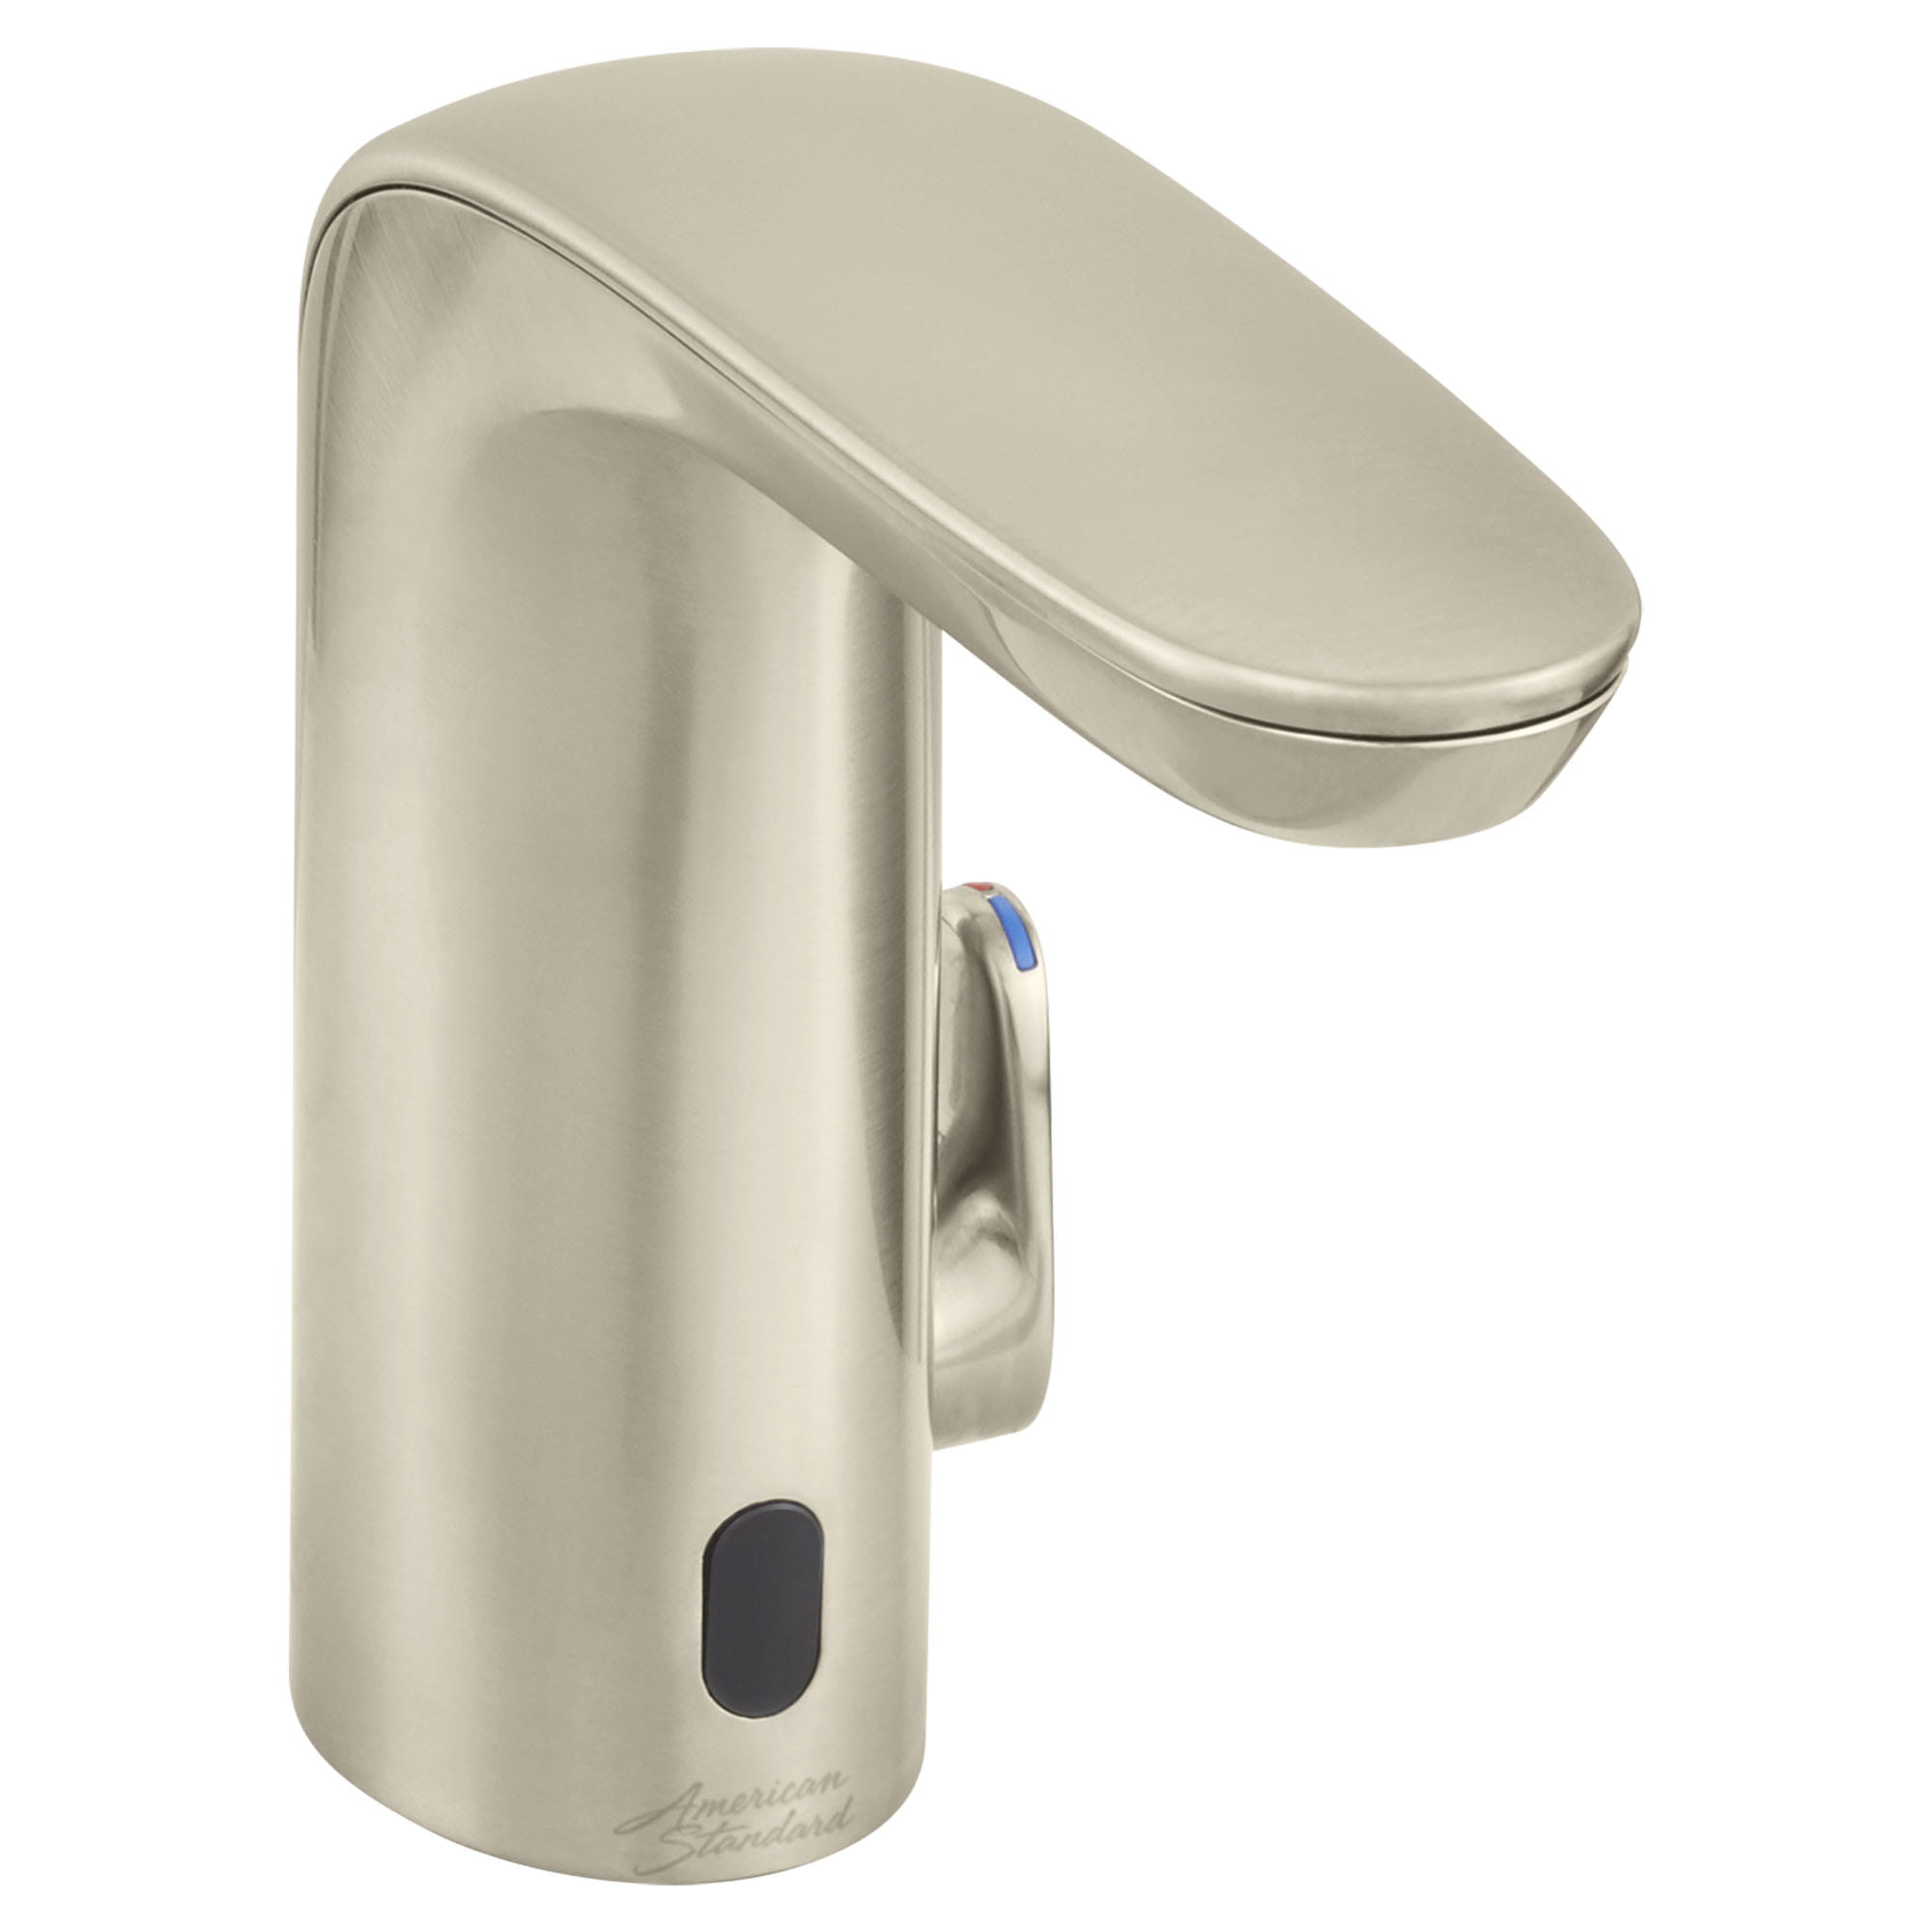 NextGen Selectronic Touchless Faucet Battery Powered With Above Deck Mixing 05 gpm 19 Lpm   BRUSHED NICKEL